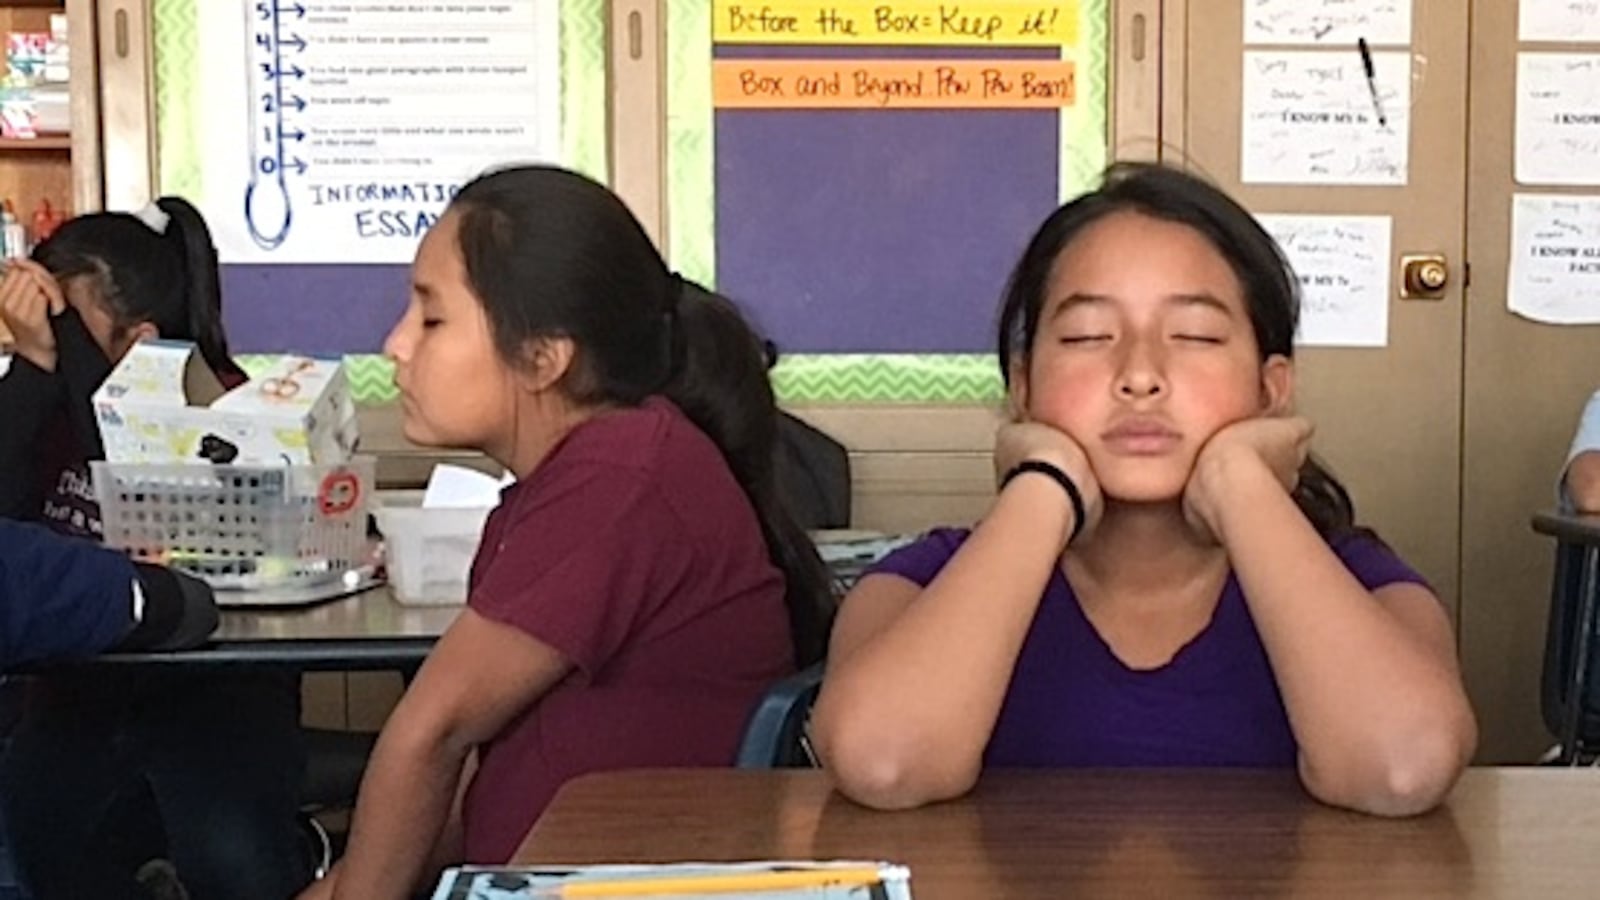 A fifth-grader in Fallon Newman’s class practices mindfulness at Munroe Elementary School in Denver.